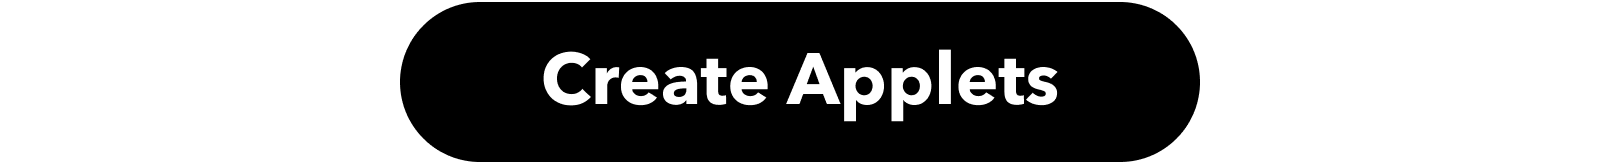 Create Applets Button